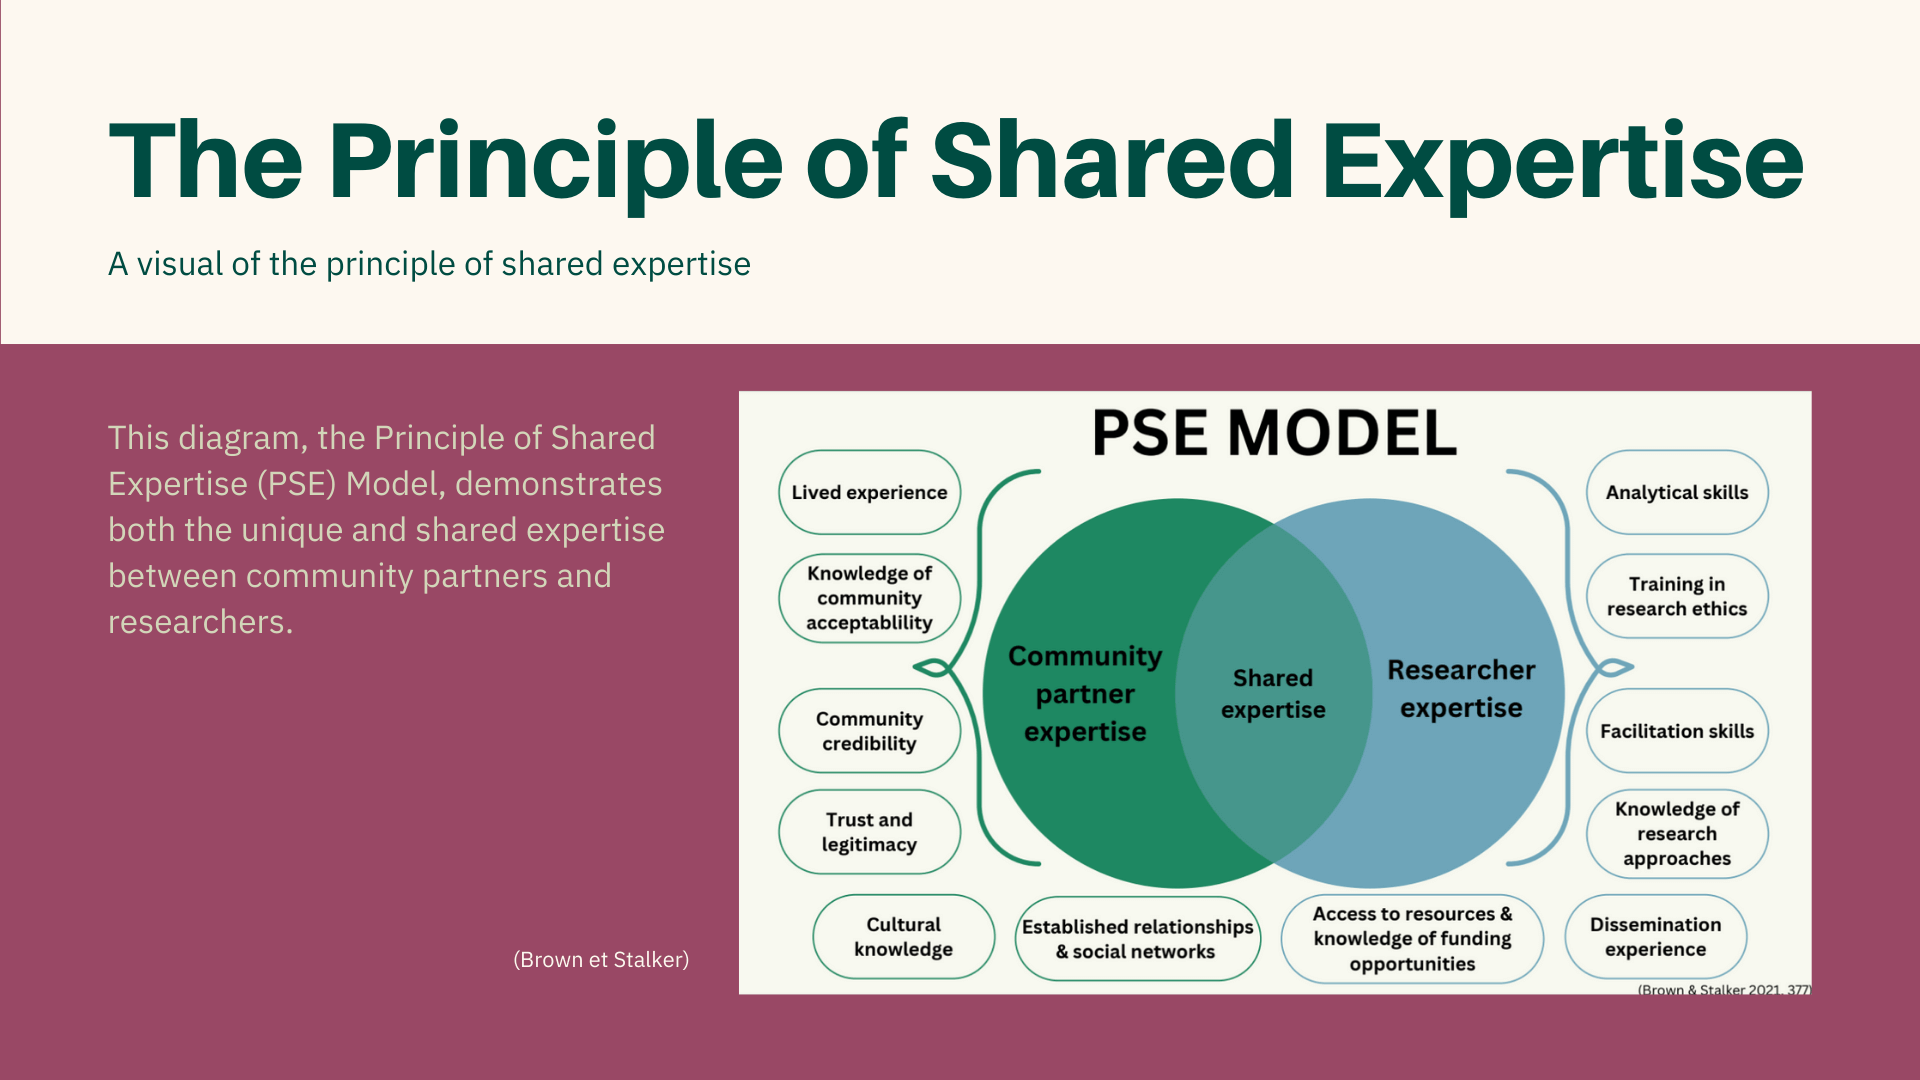 An overview of the PSE model - the principle of shared expertise